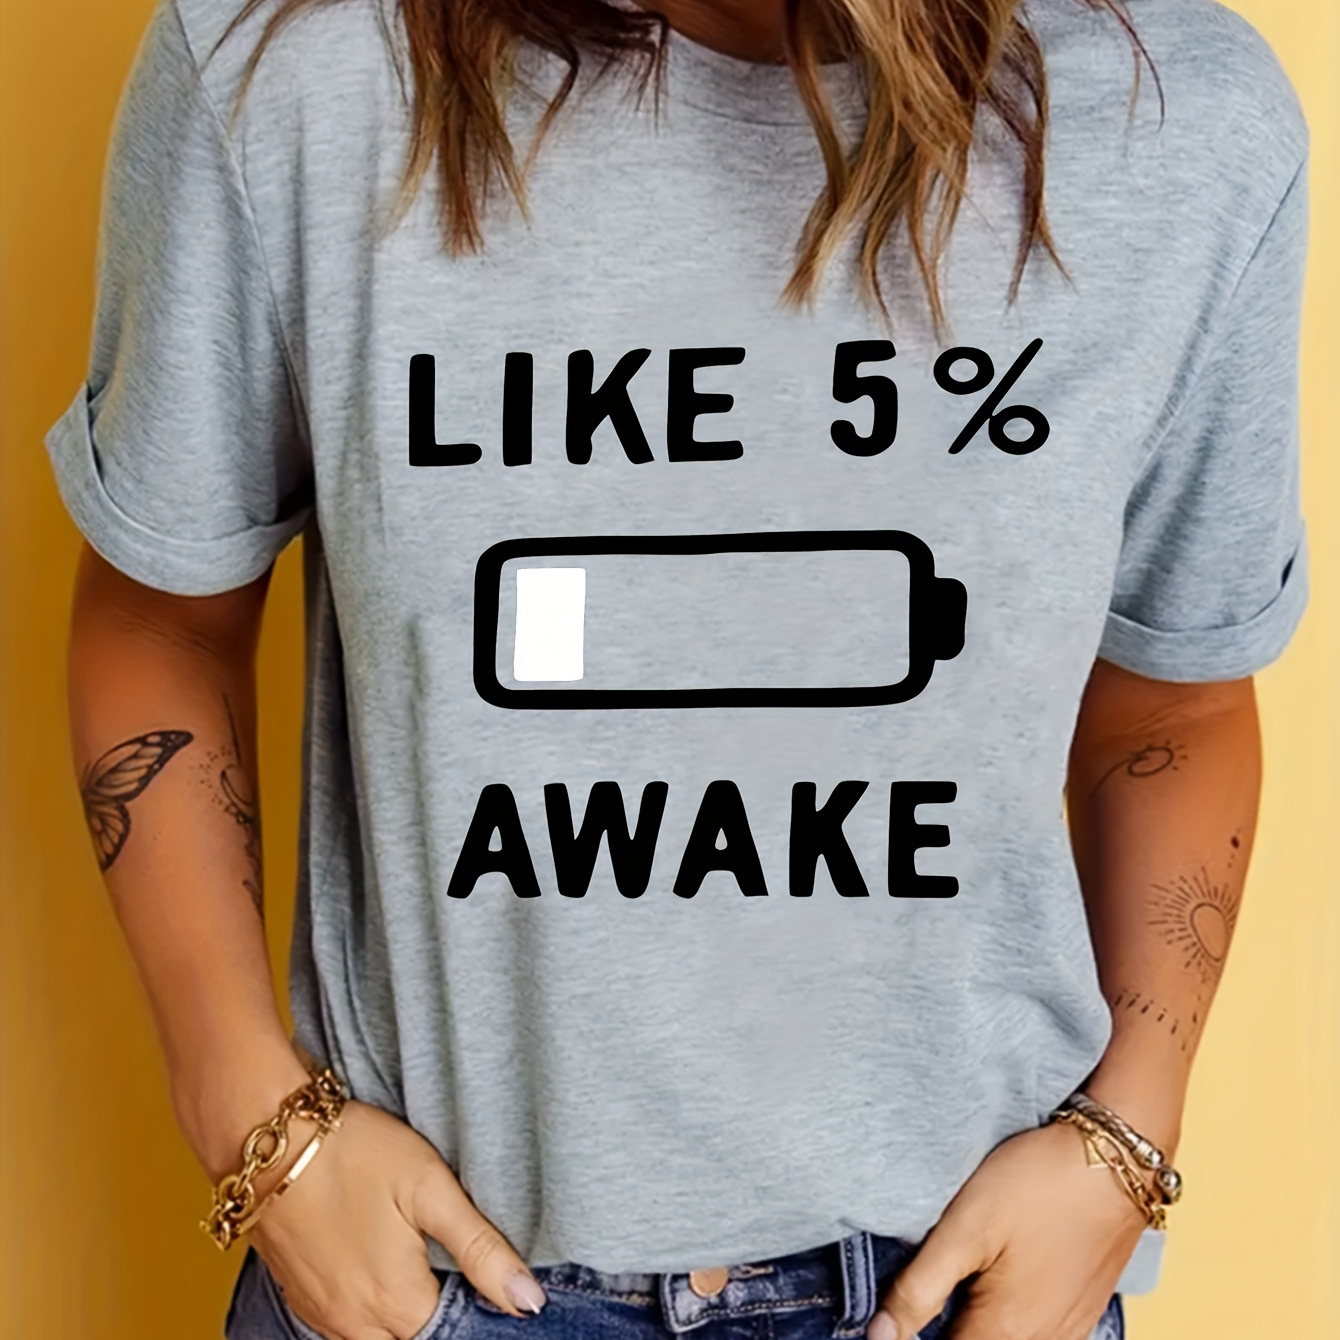 

Funny Graphic & Words Print T-shirt, Casual Short Sleeve Crew Neck Summer Top, Women's Clothing